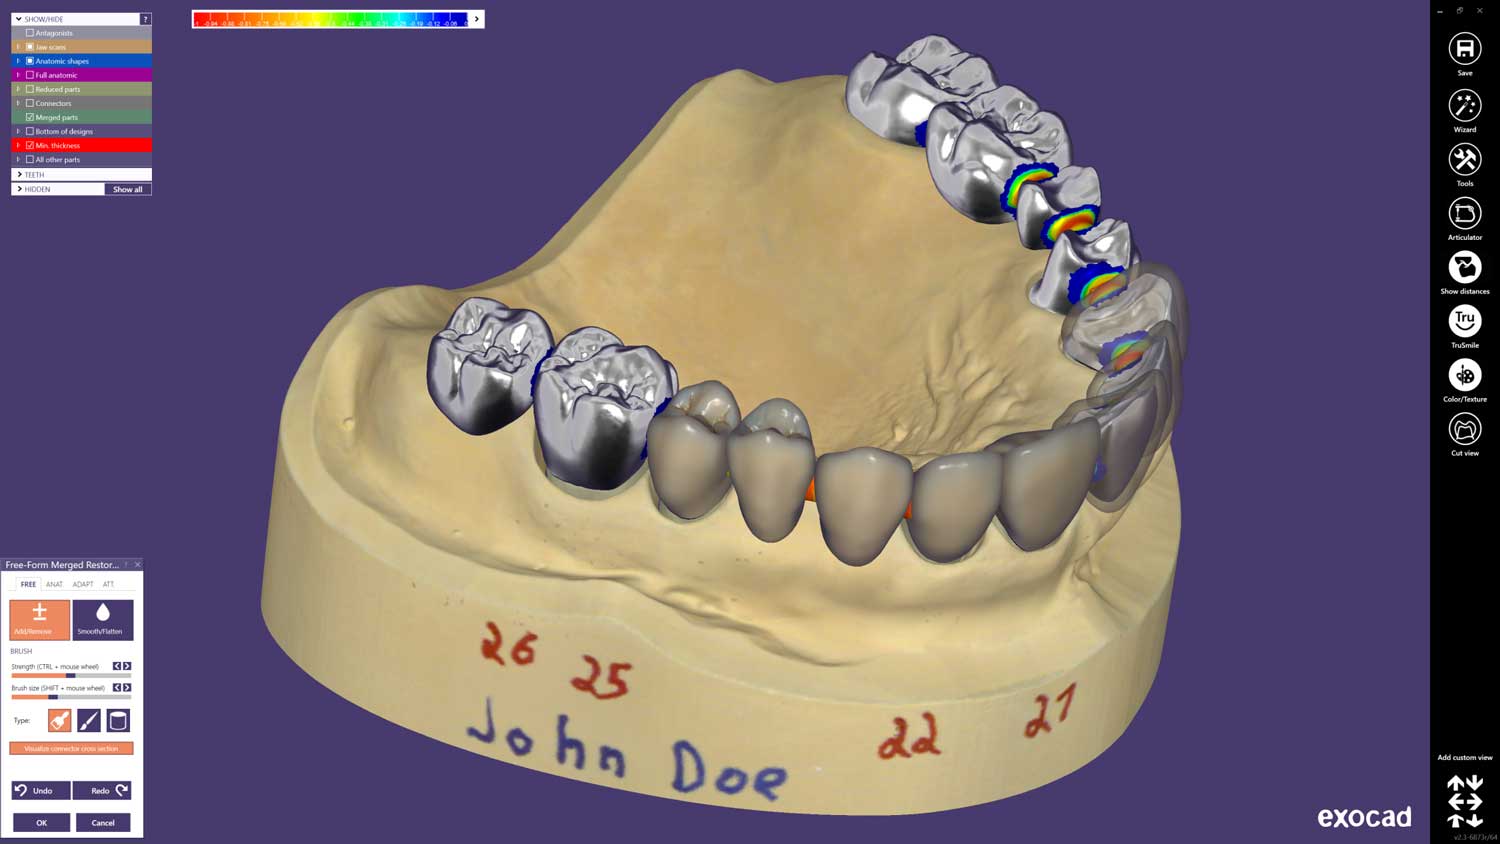 exocad-DentalCAD-Page-05-Preview-2048x1152-1